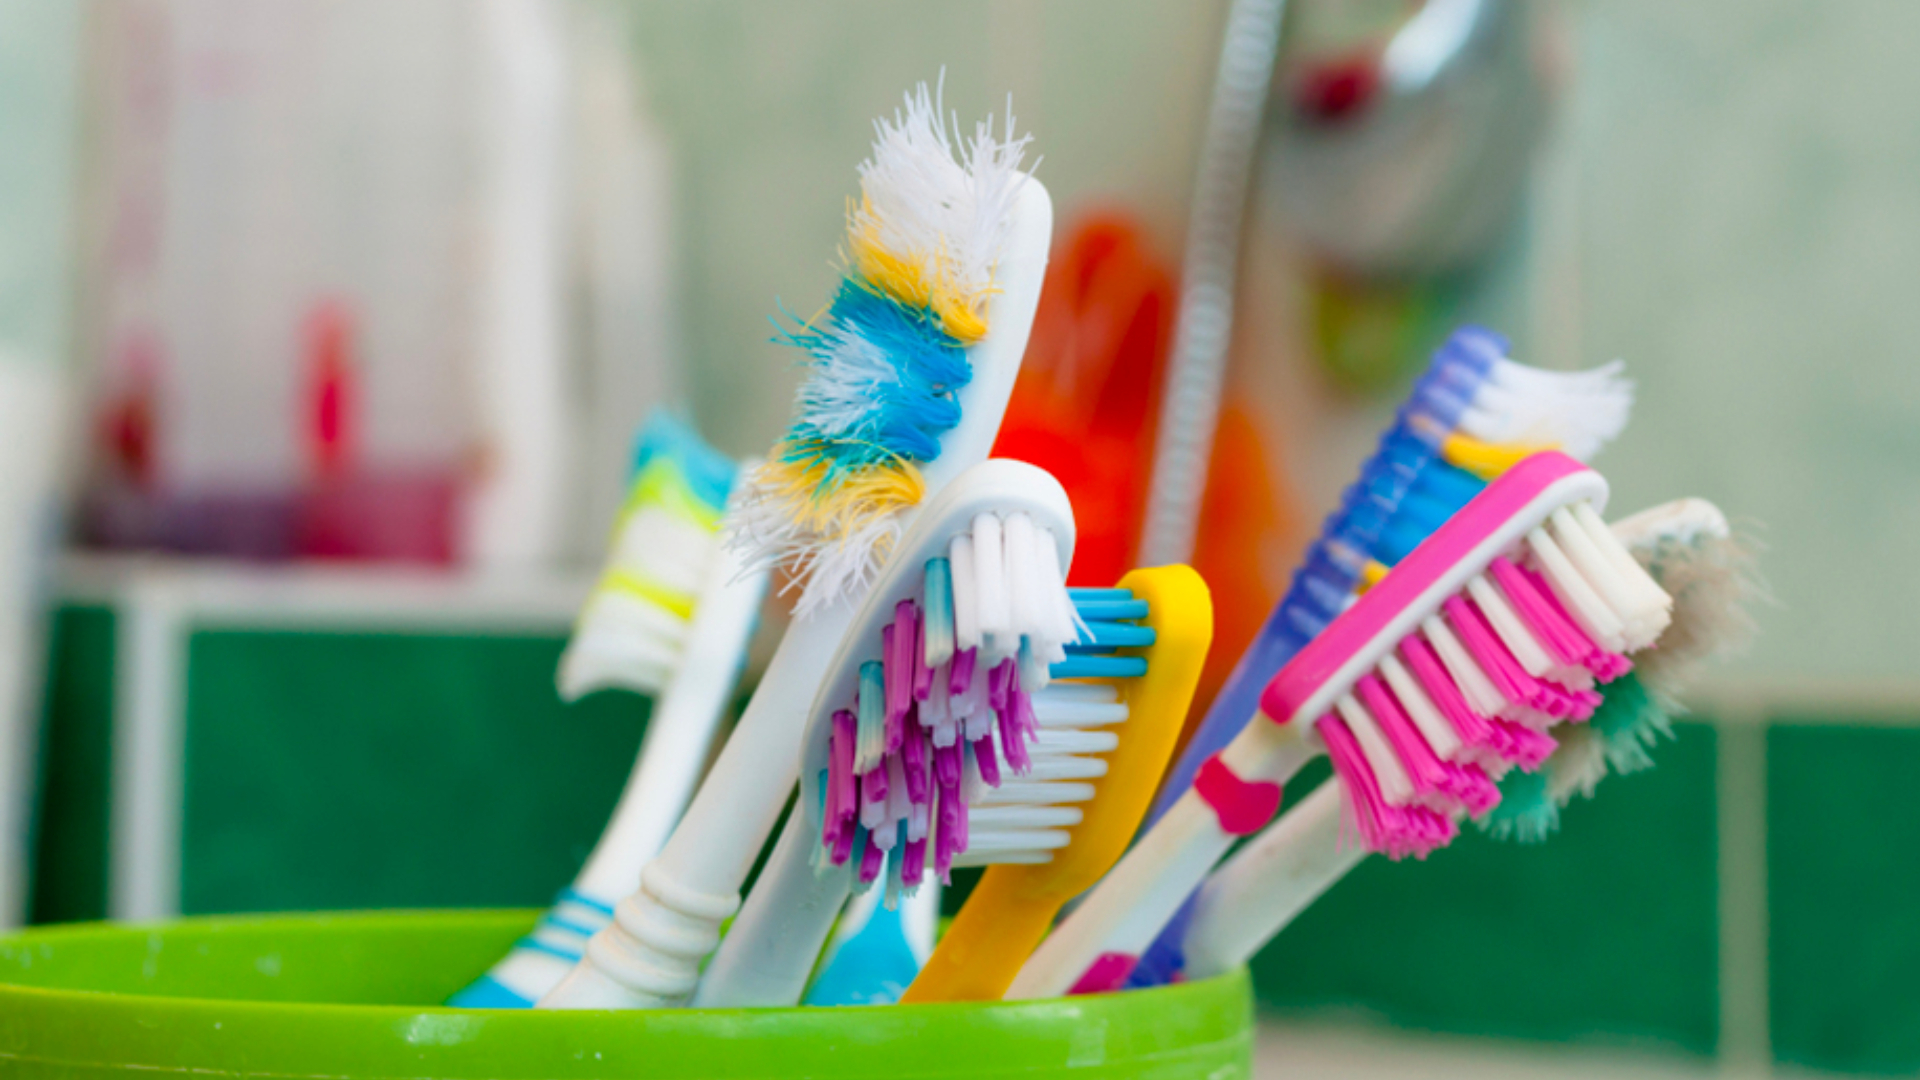 This dentists' teeth brushing recommendation may shock you